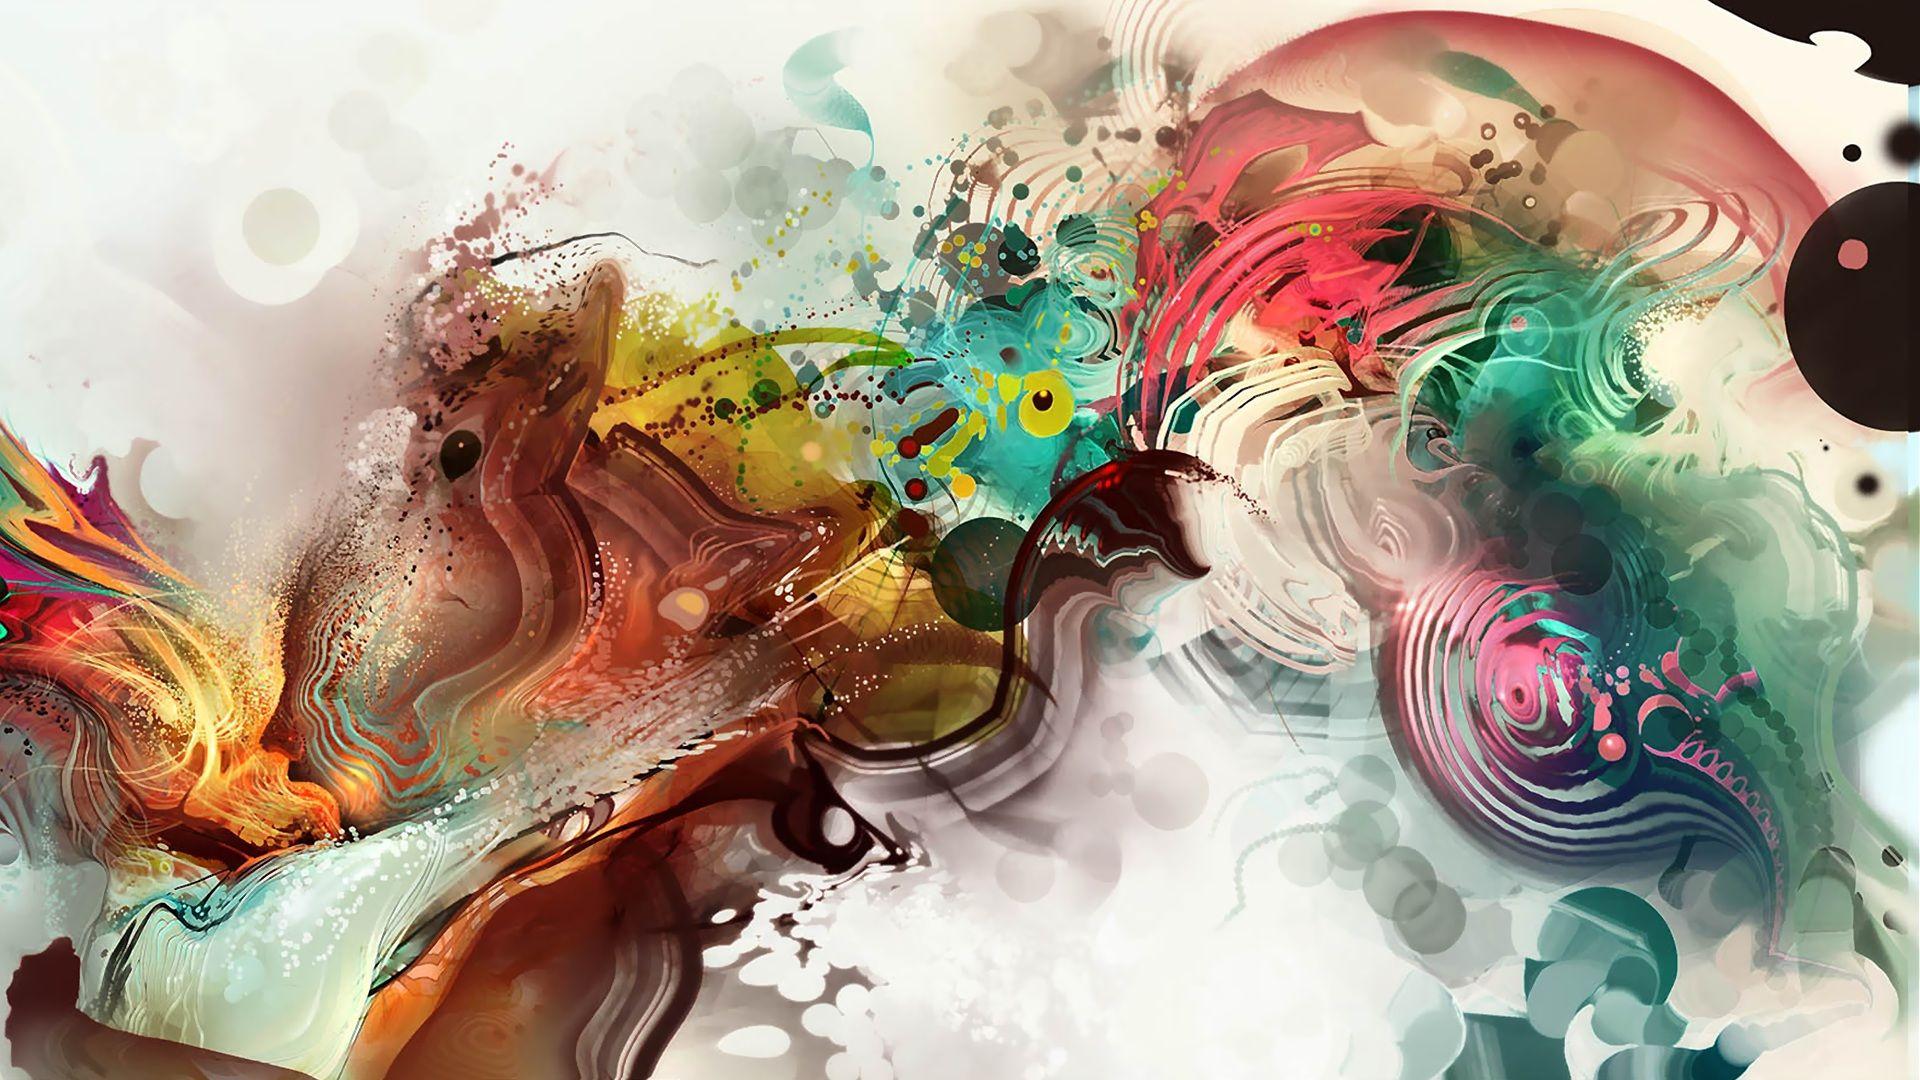 Abstract Artistic Wallpaper (9781)